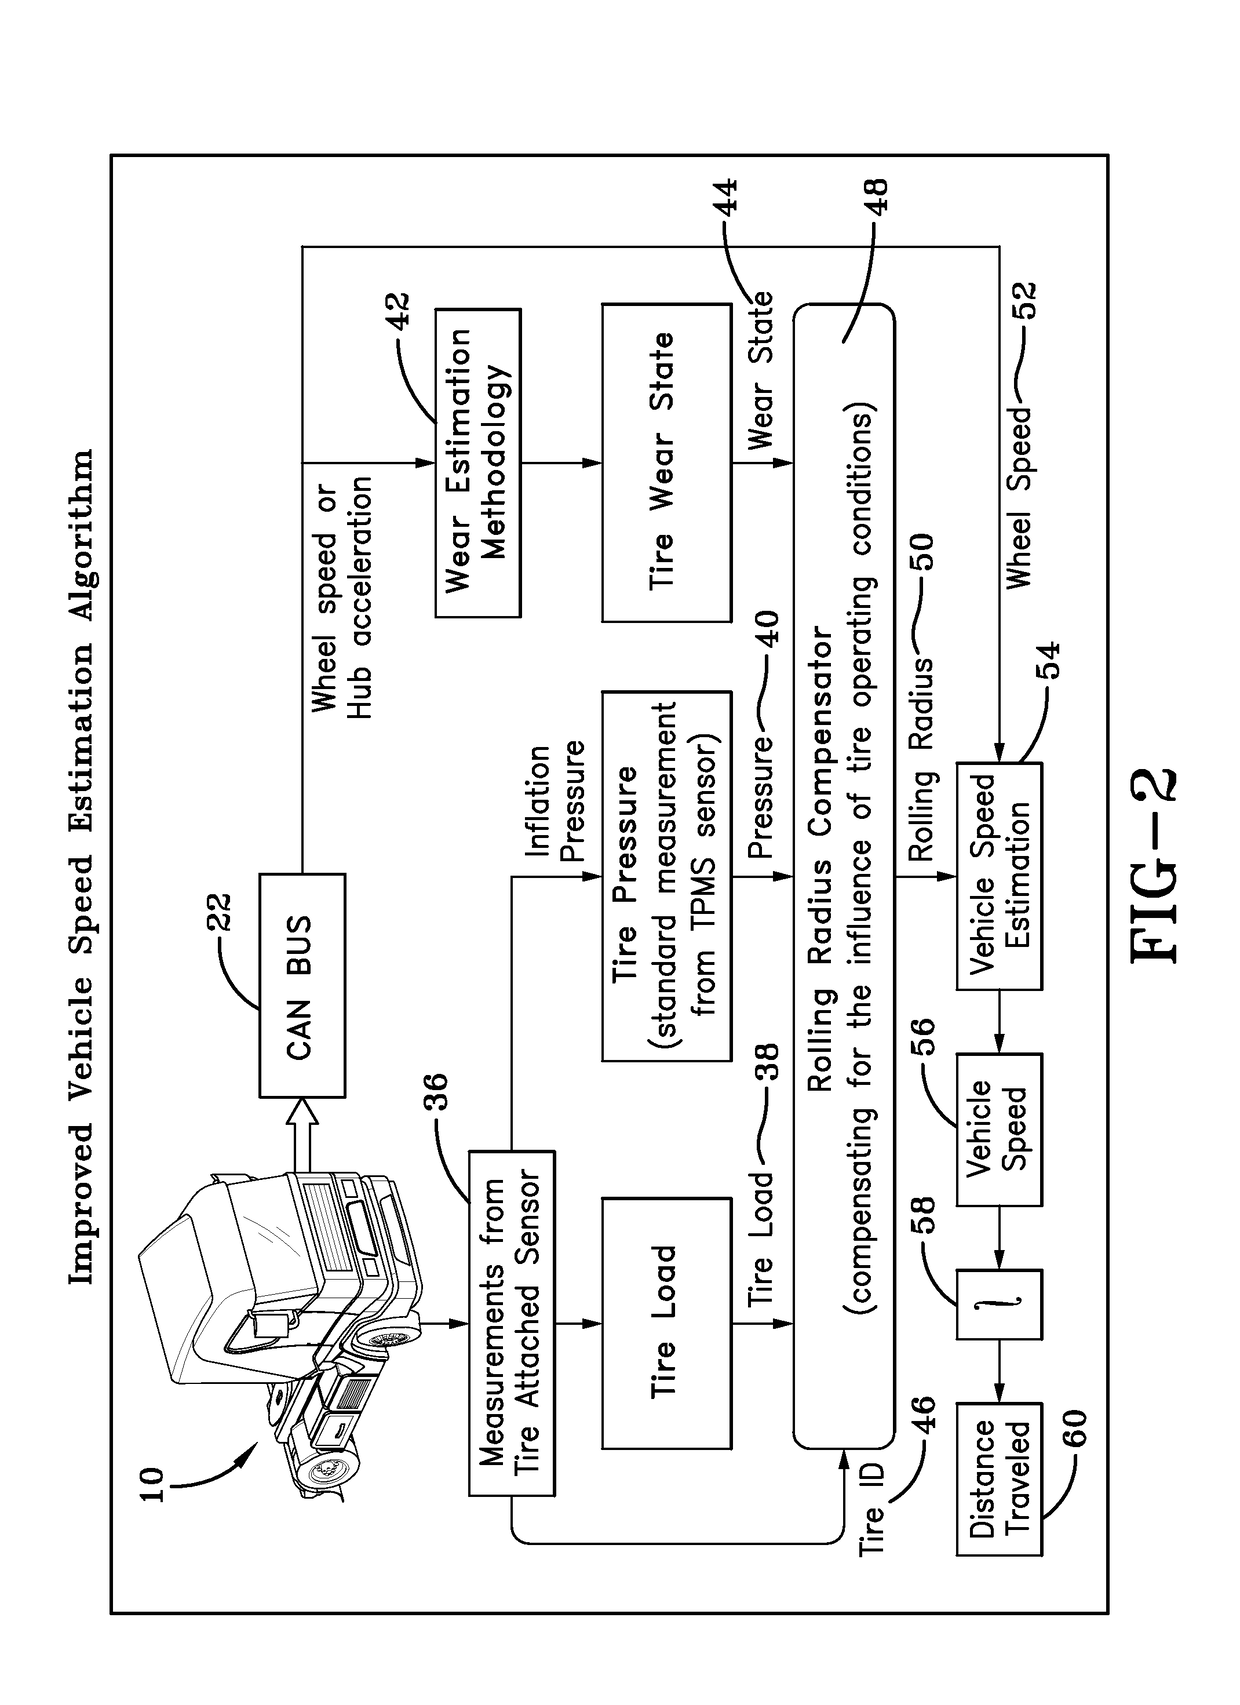 Tire sensor-based robust mileage tracking system and method